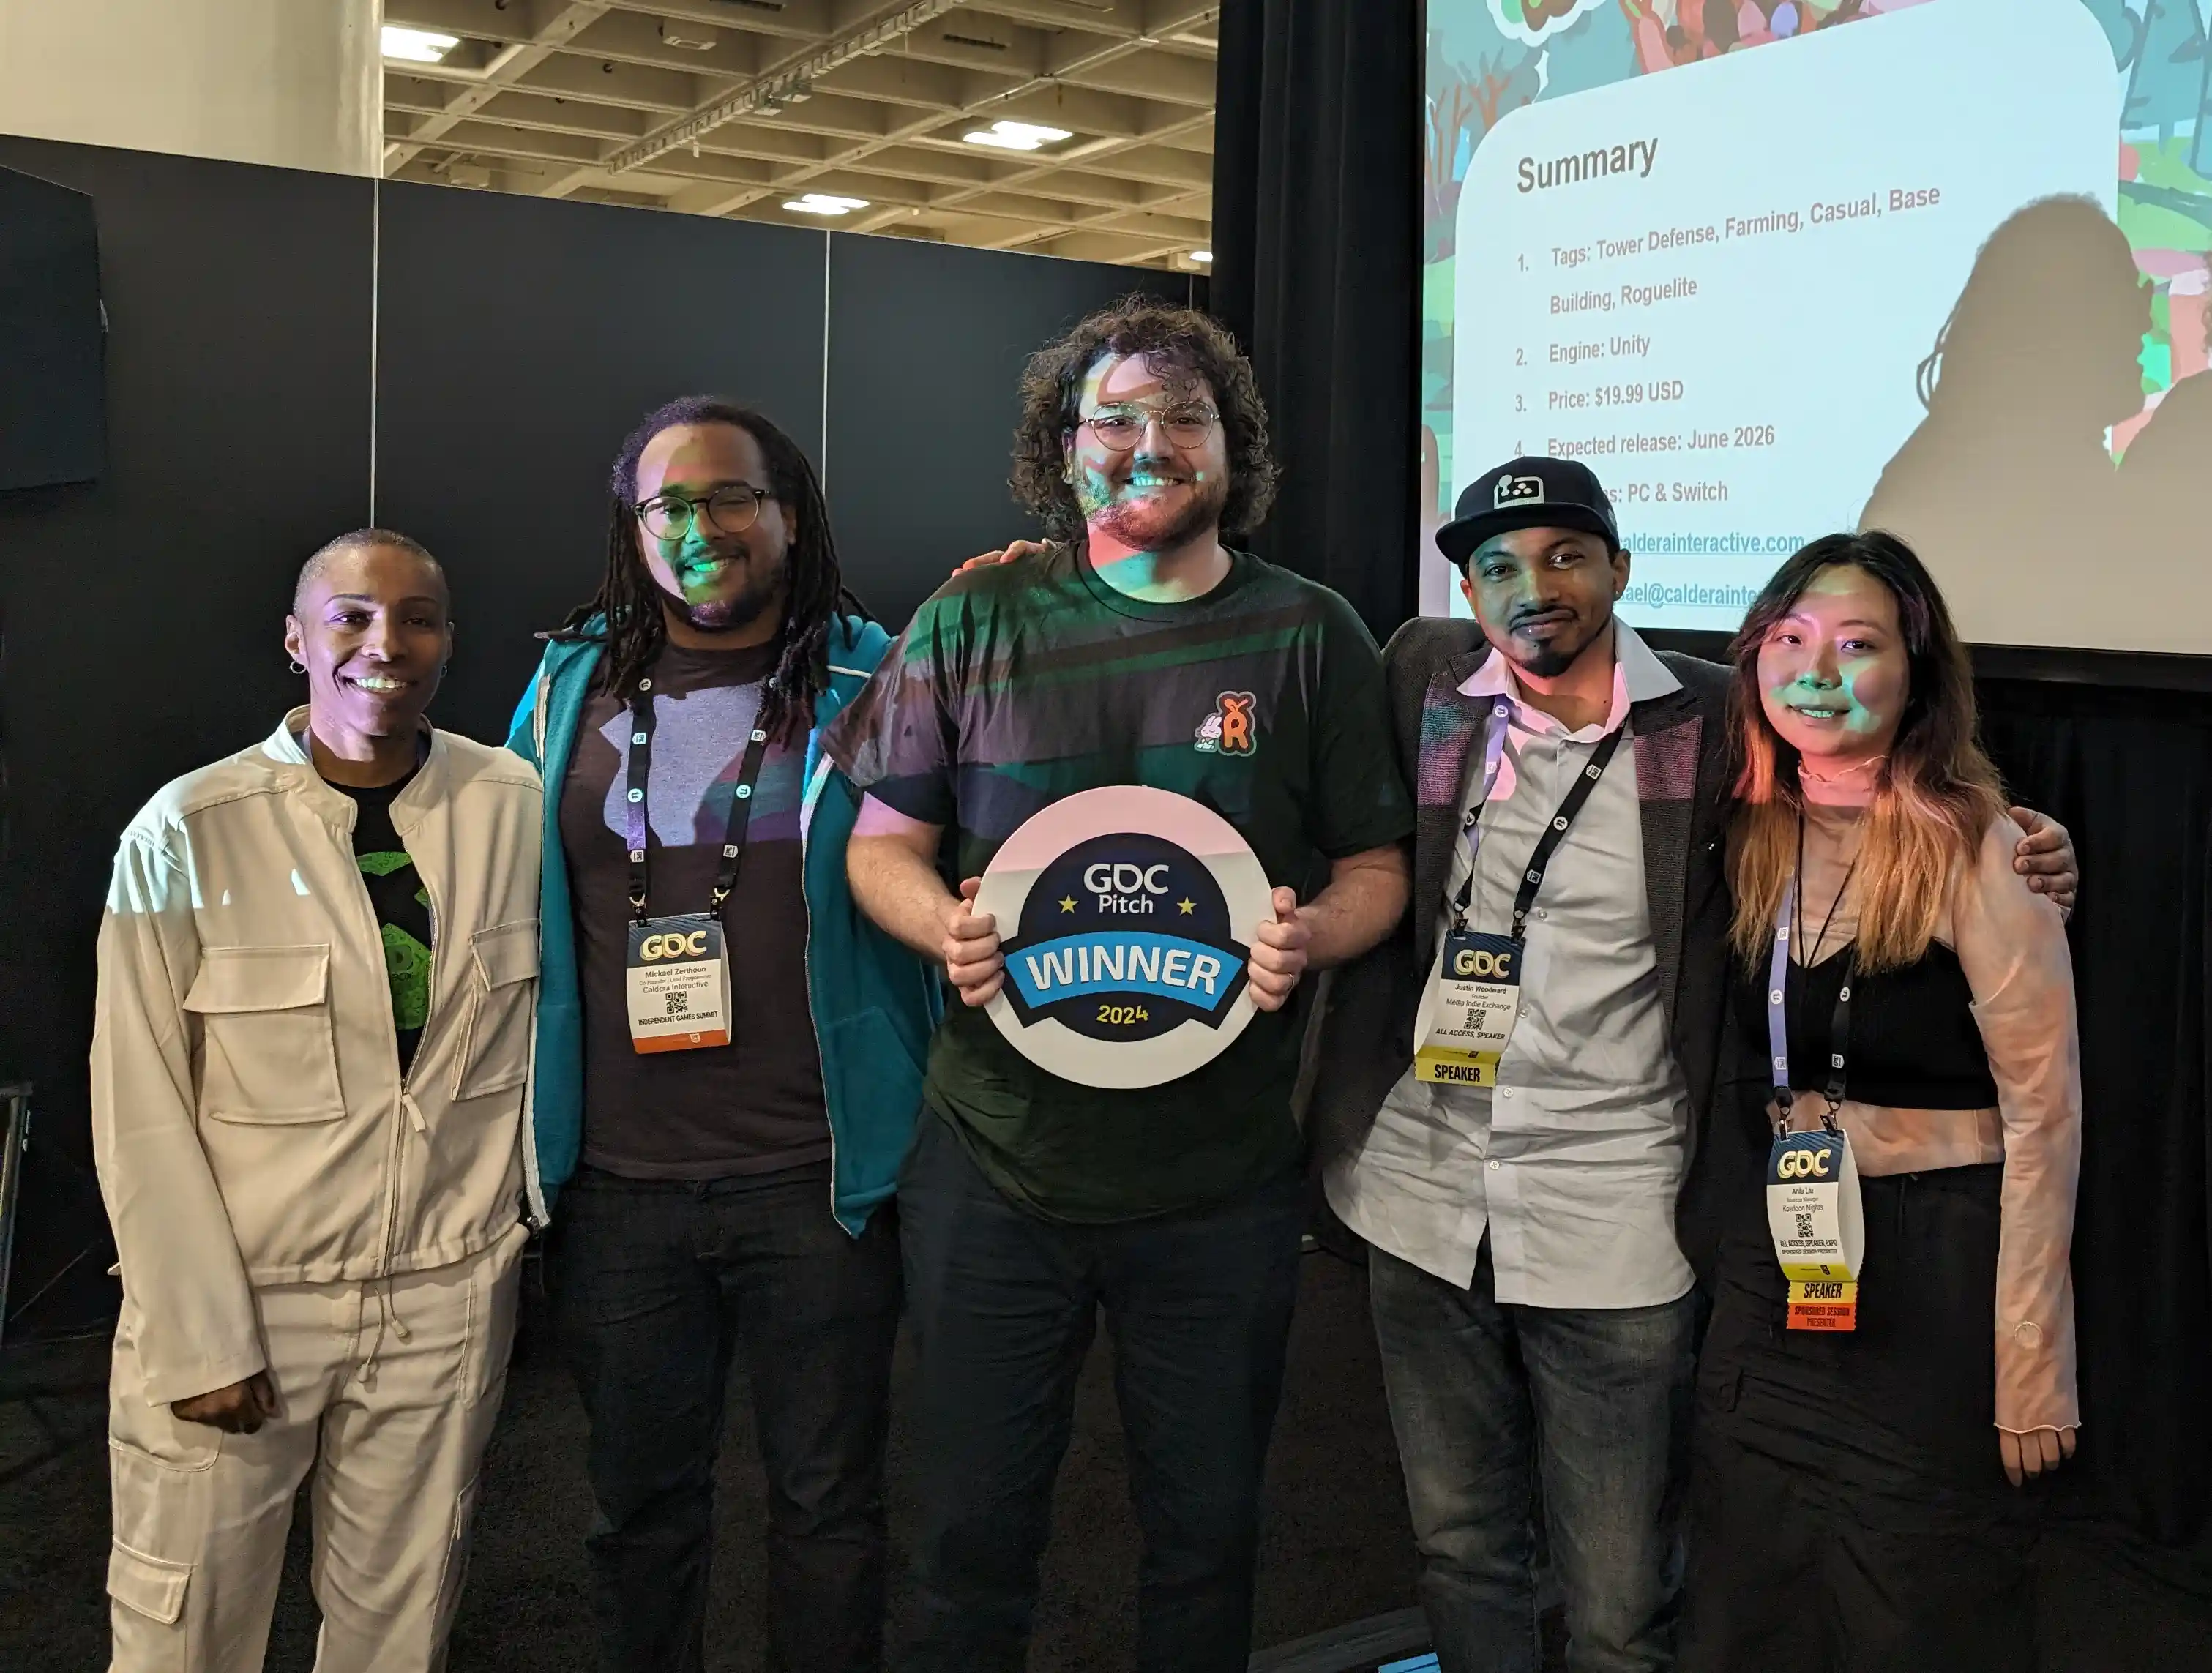 Photo of Caldera Interactive winning the GDC Pitch competition